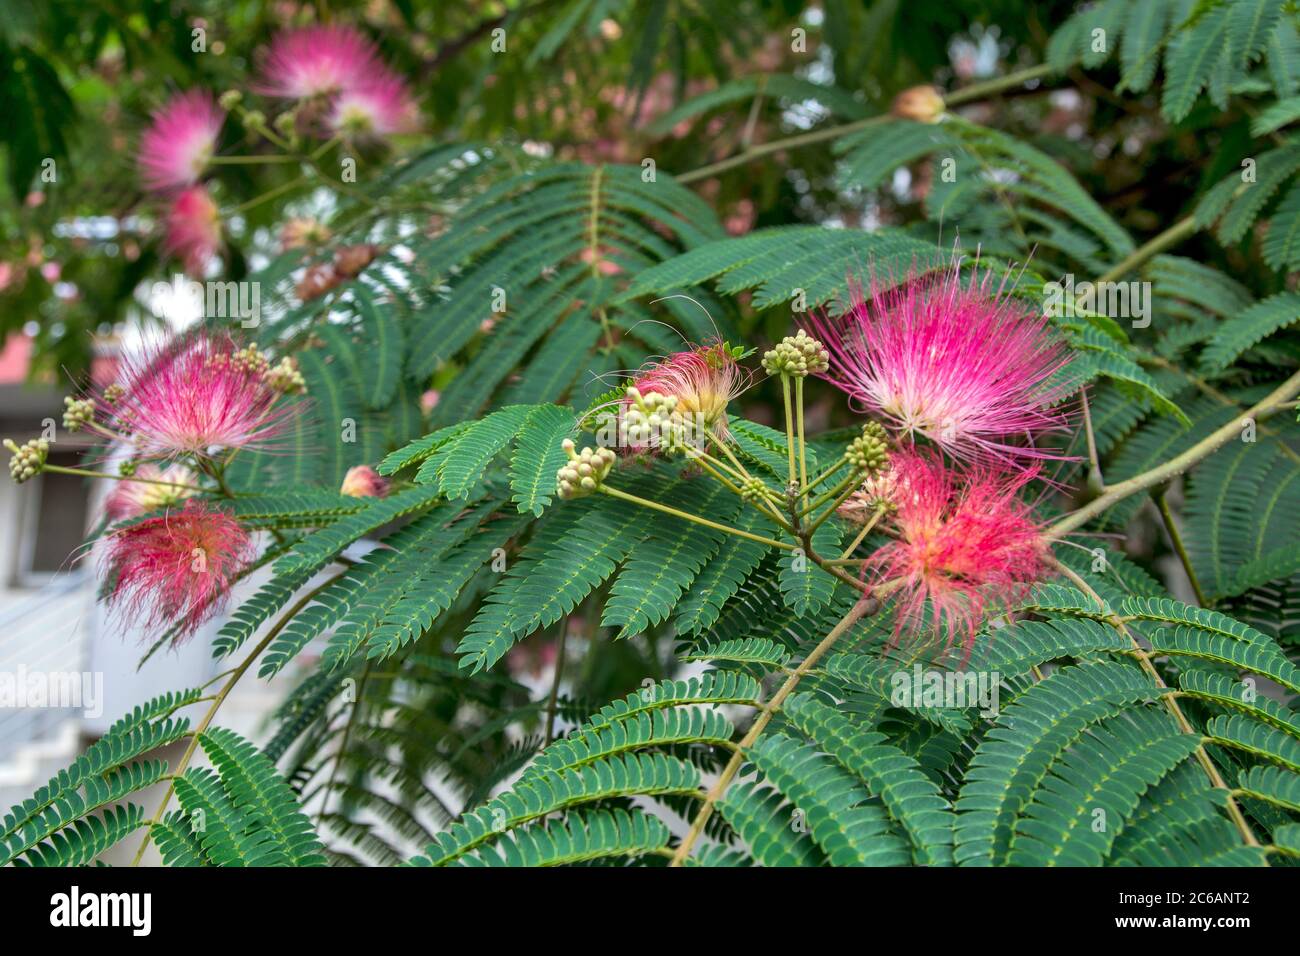 Beautiful blooming fragrant flowers Albicija attract insects and walkers people. Stock Photo